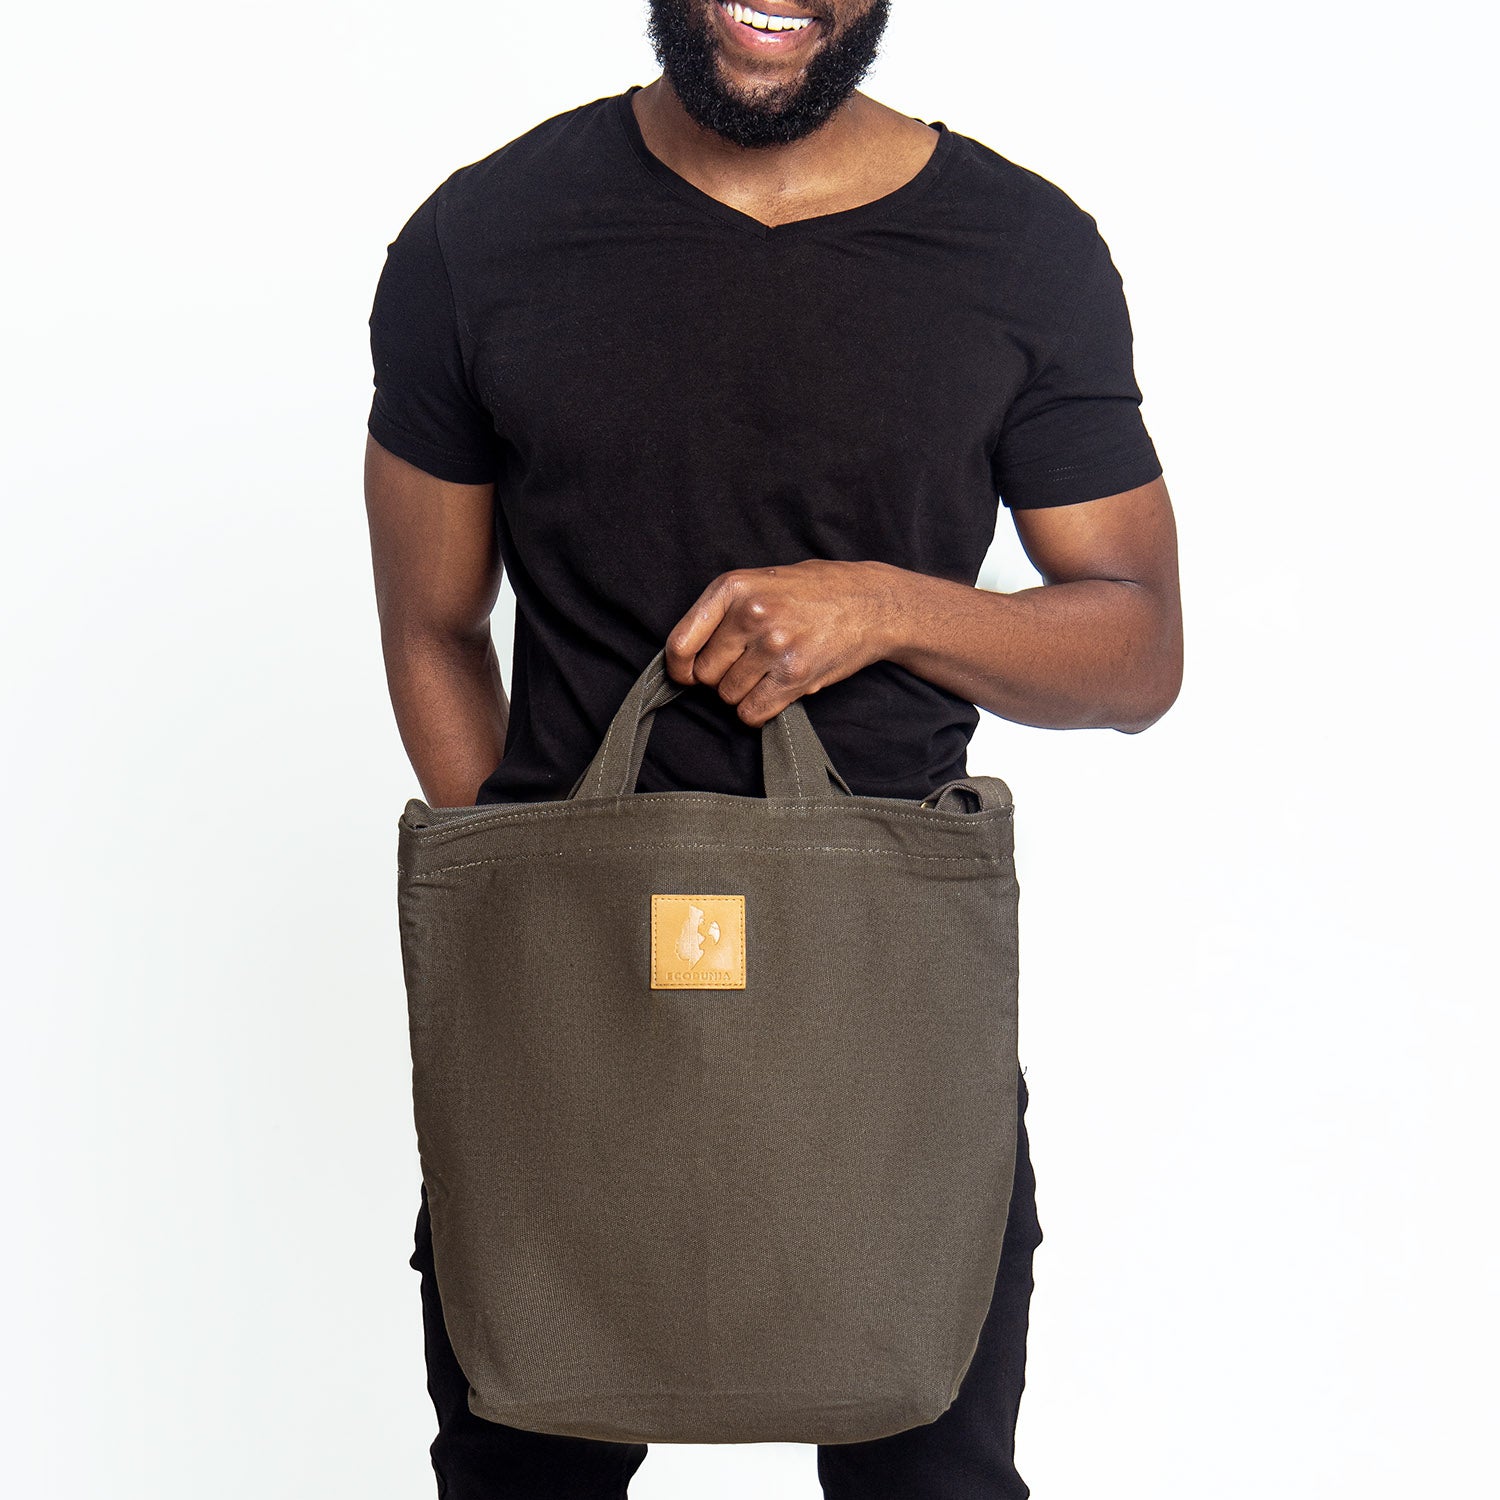 The Amani Carry All Bag - Green